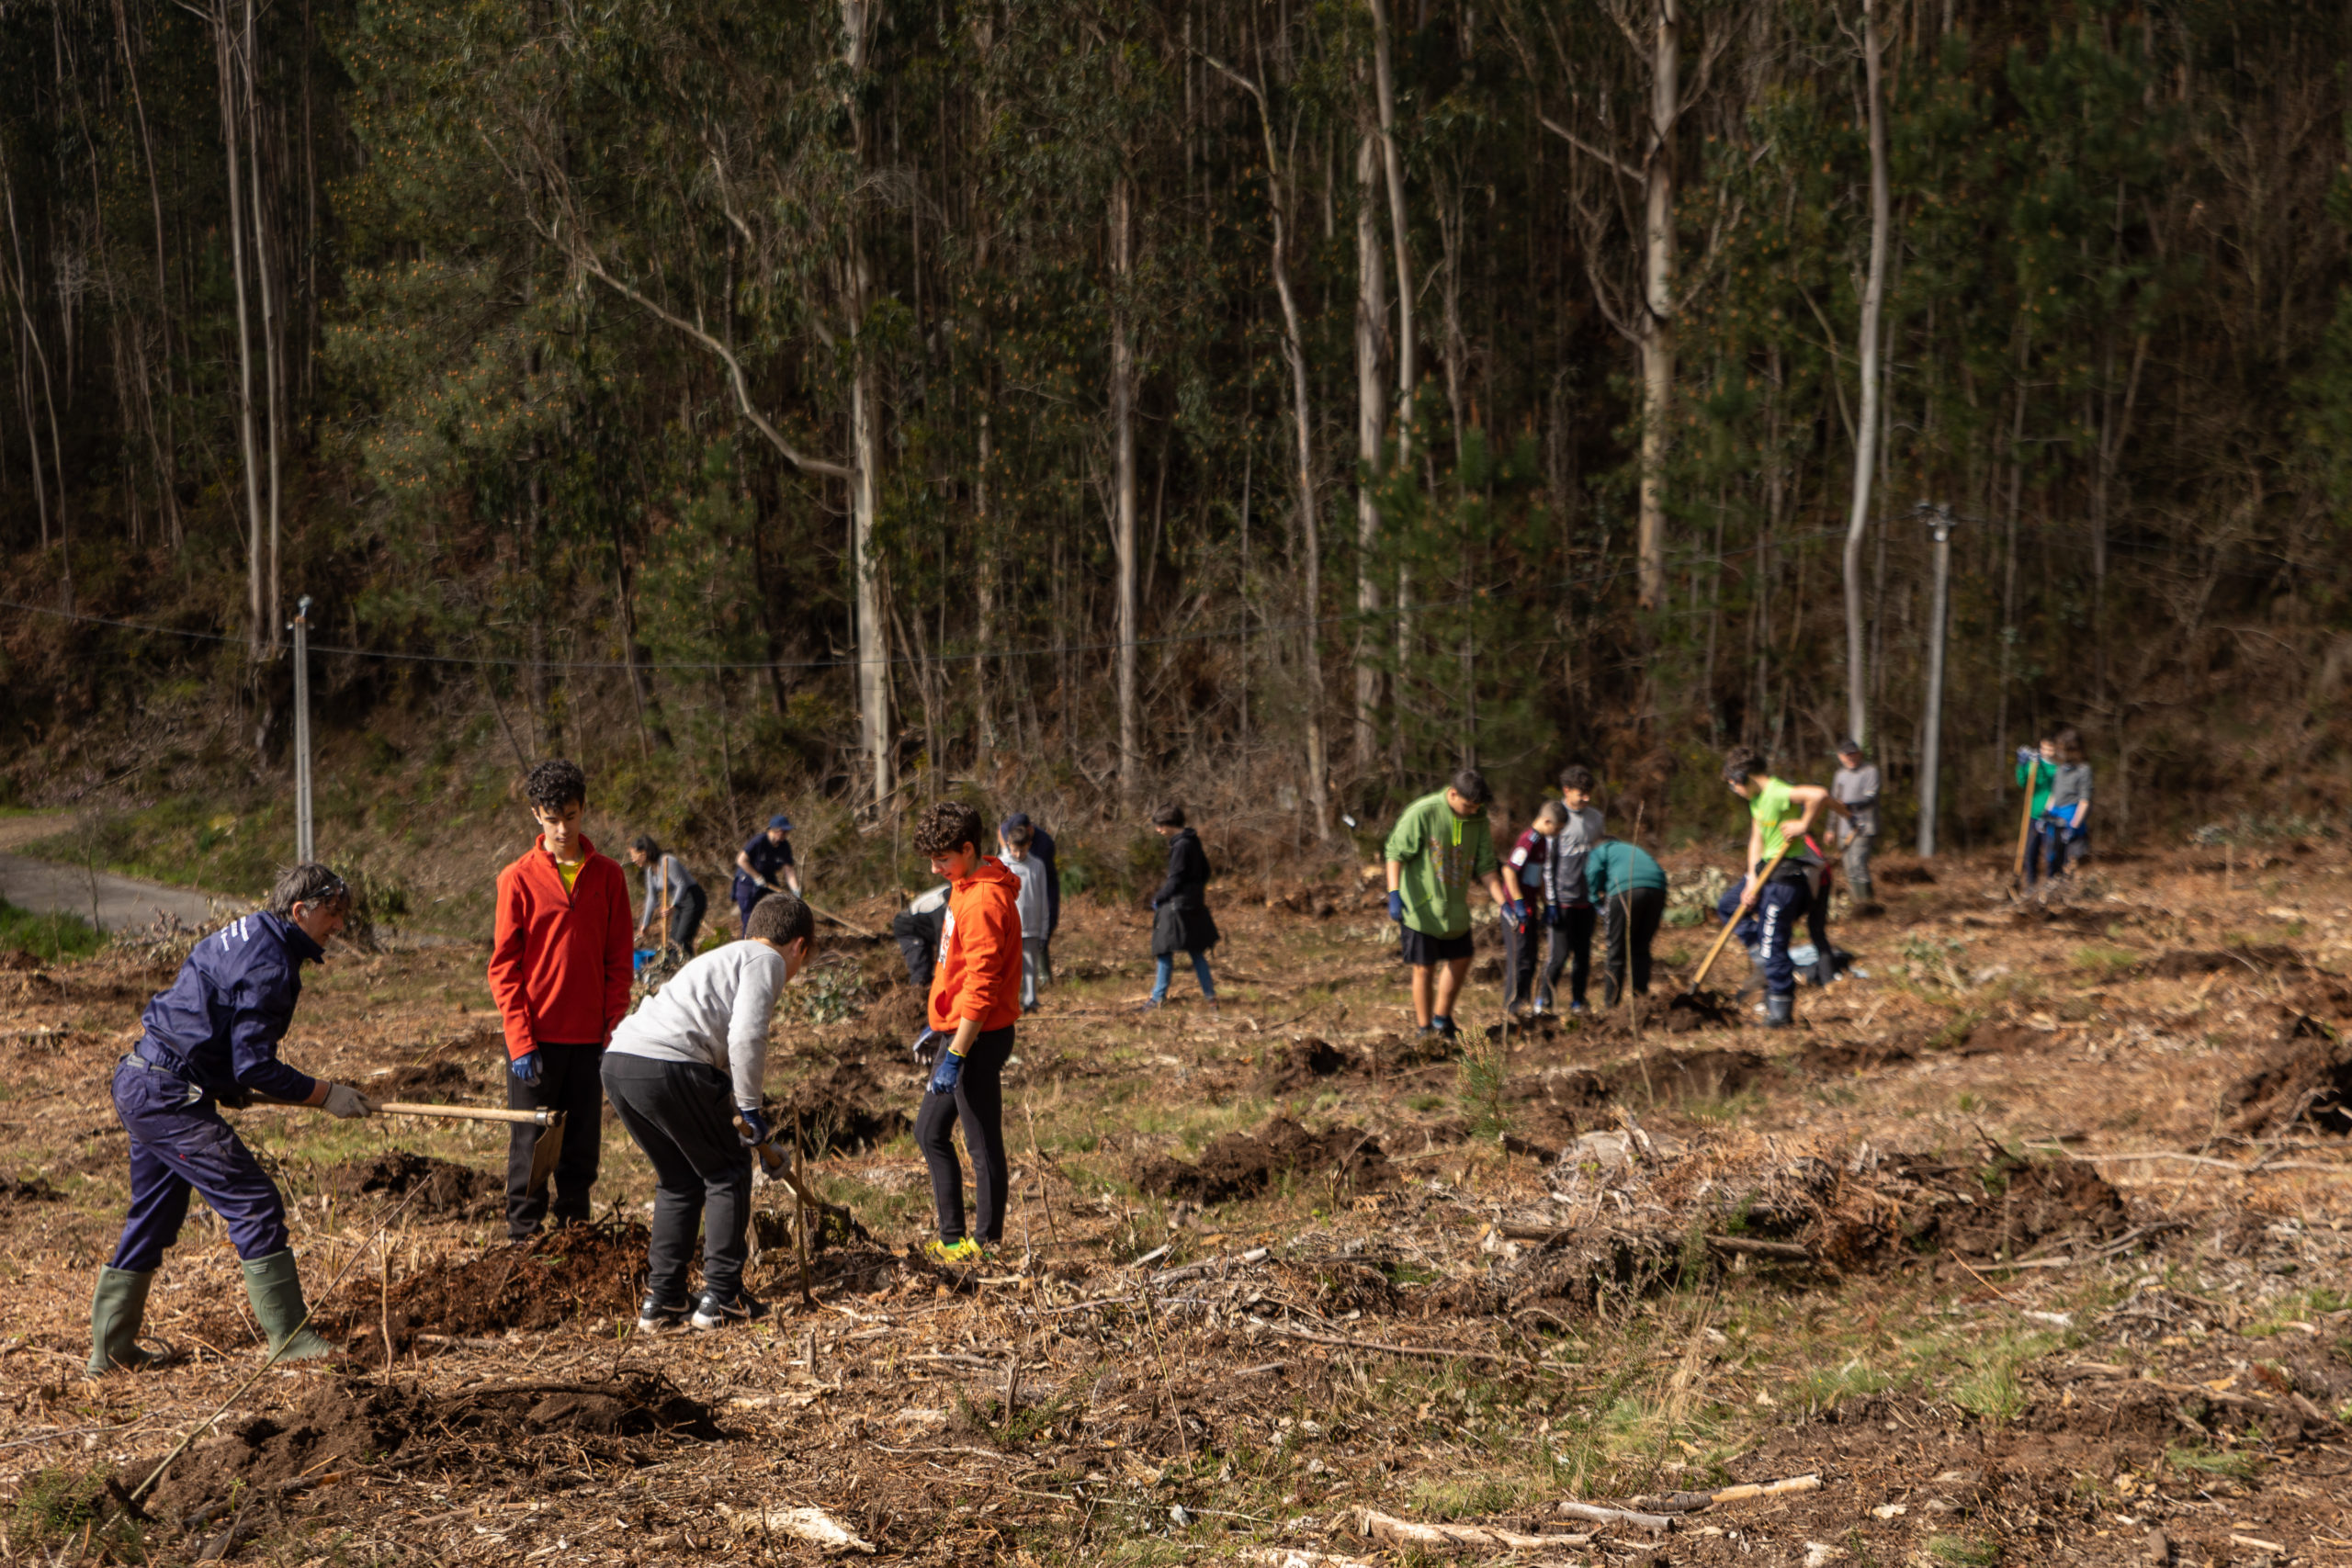 One thousand new trees in Araño's forest